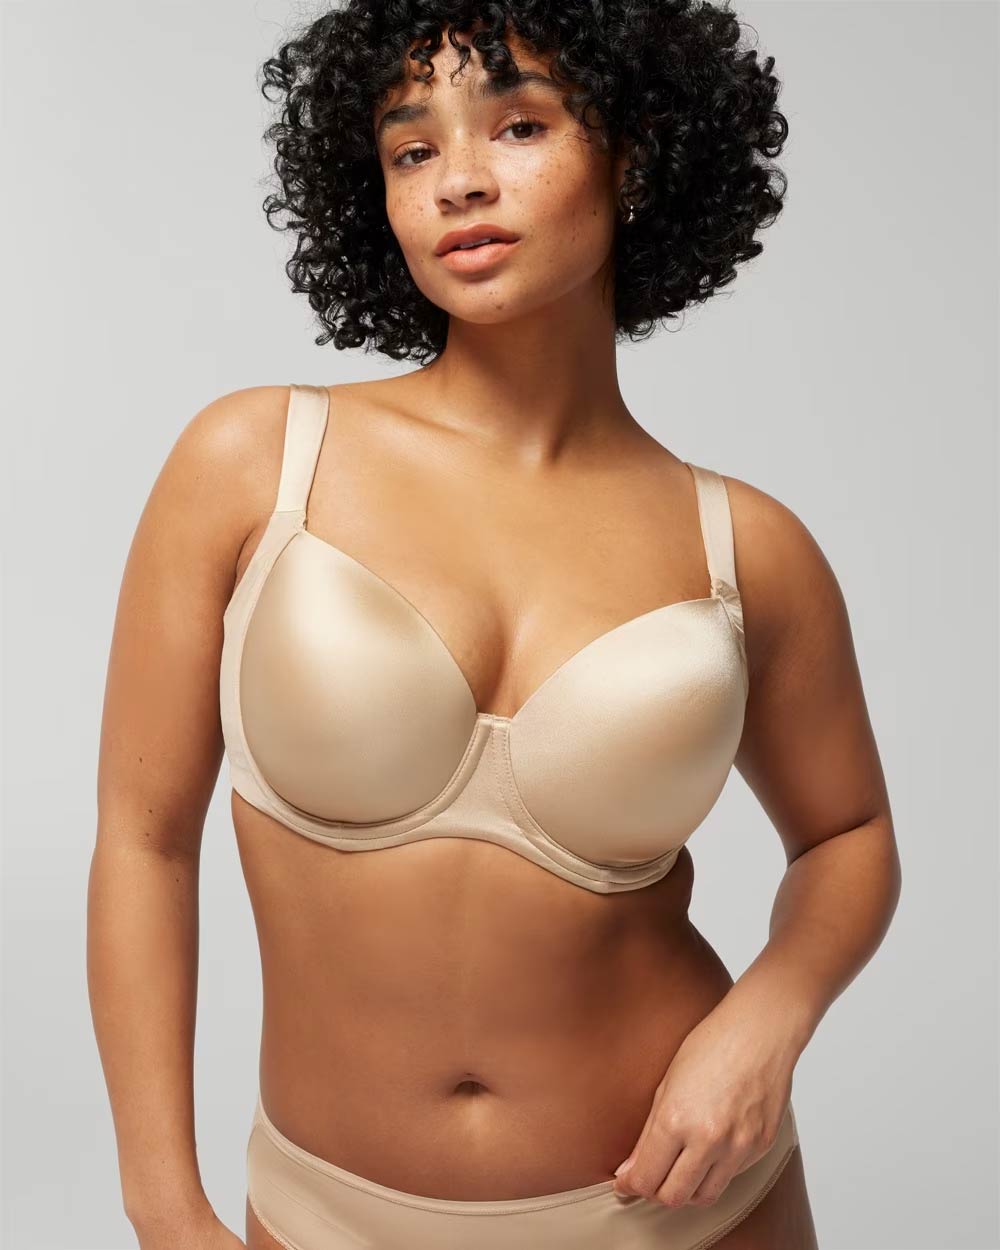 Soma<sup class=st-superscript>®</sup> women’s model wearing a nude full coverage bra and panties.